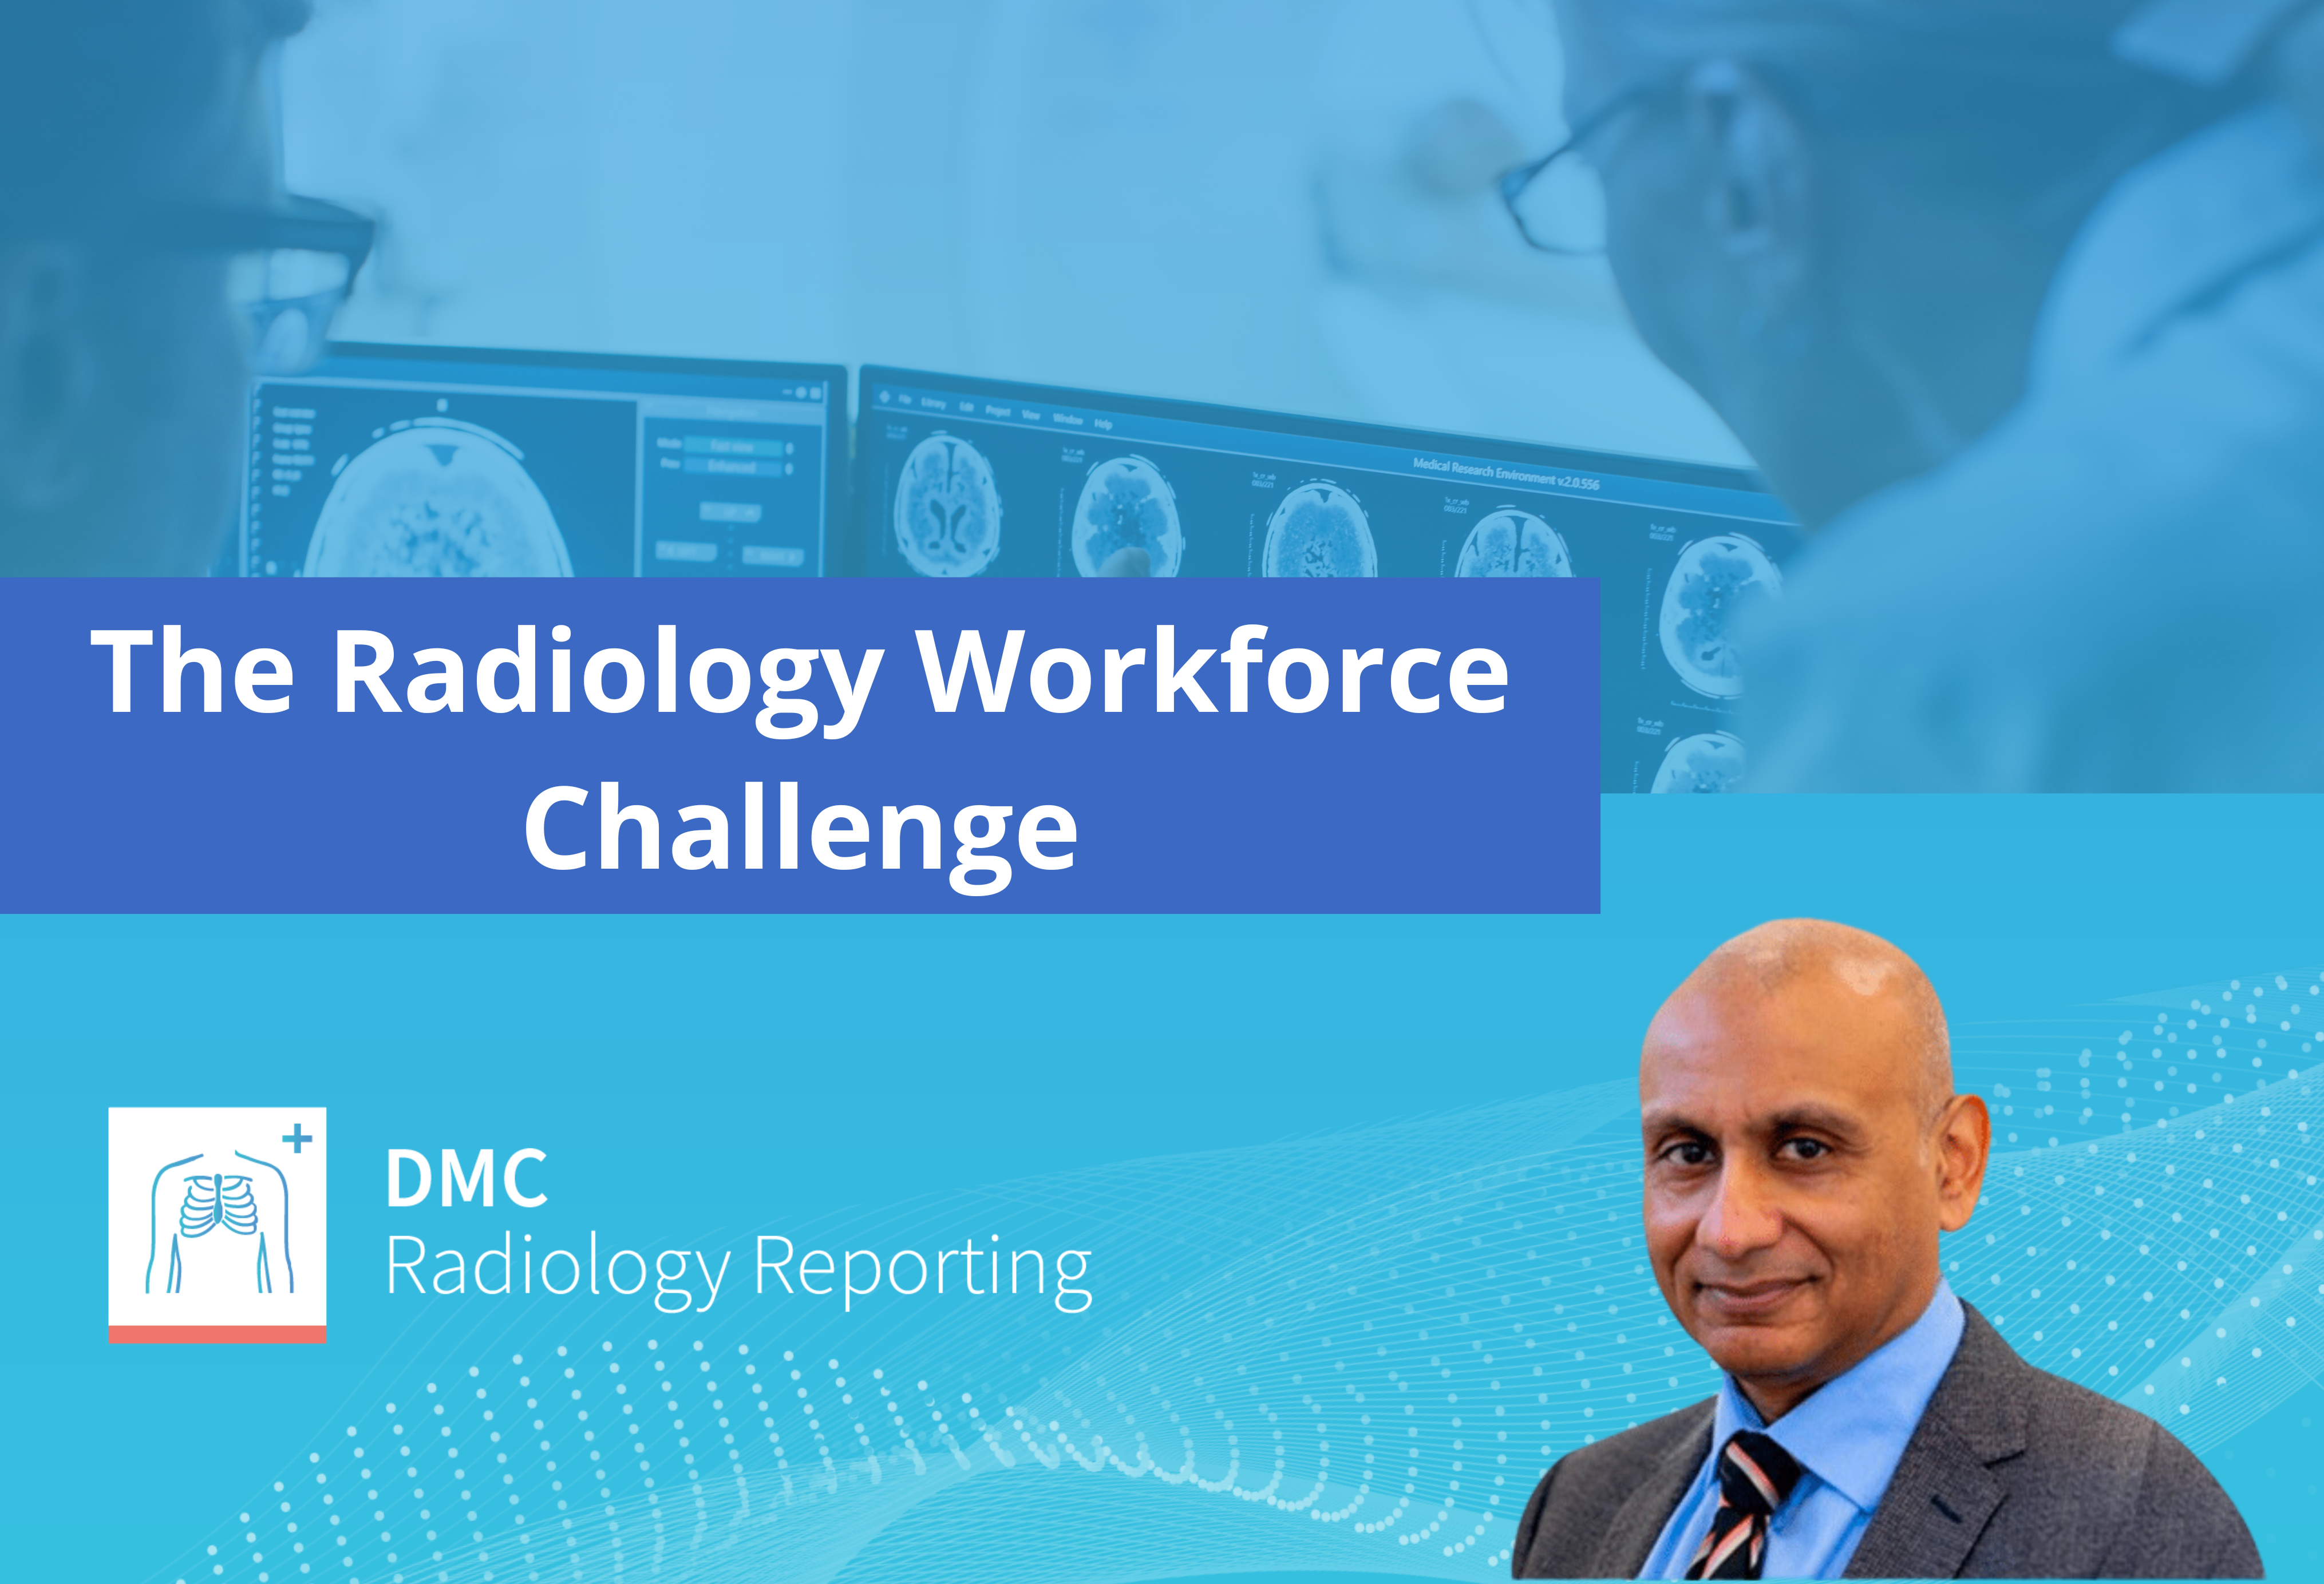 DMC Radiology Reporting co-founder and clinical director Professor Sujal Desai, career–long cardiac and thoracic radiologist, talks about the role of AI and the upcoming RCR annual conference.